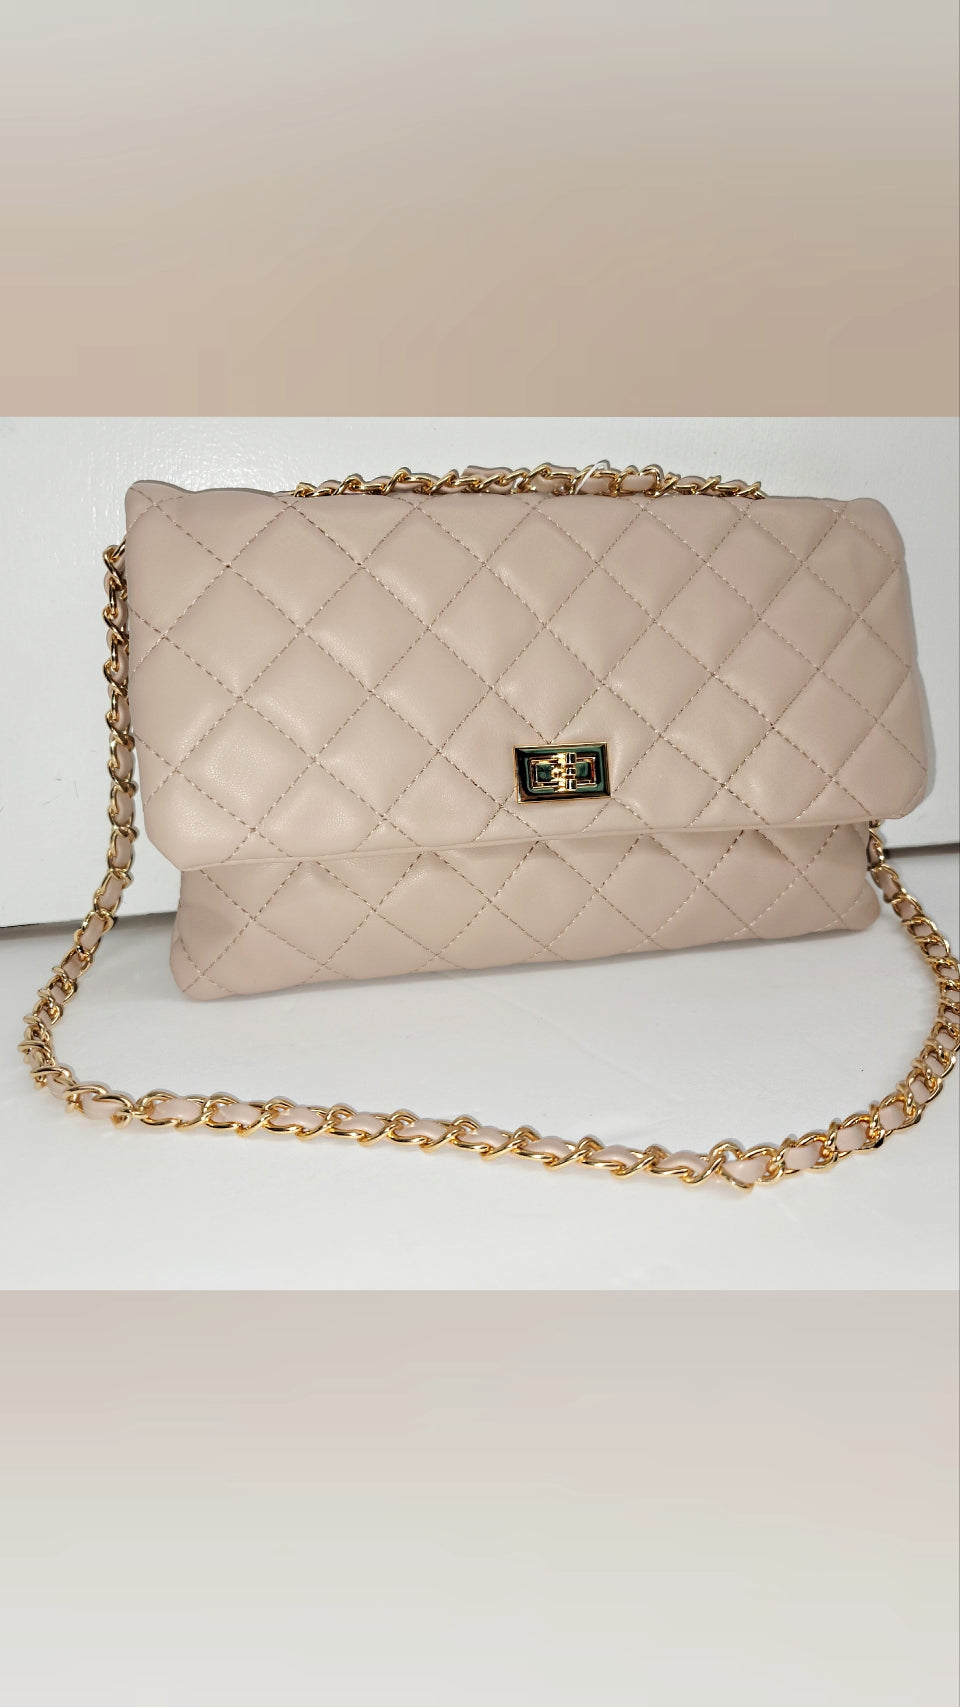 Time and Tru Women's Hazel Quilted Faux Leather Crossbody Bag, Beige